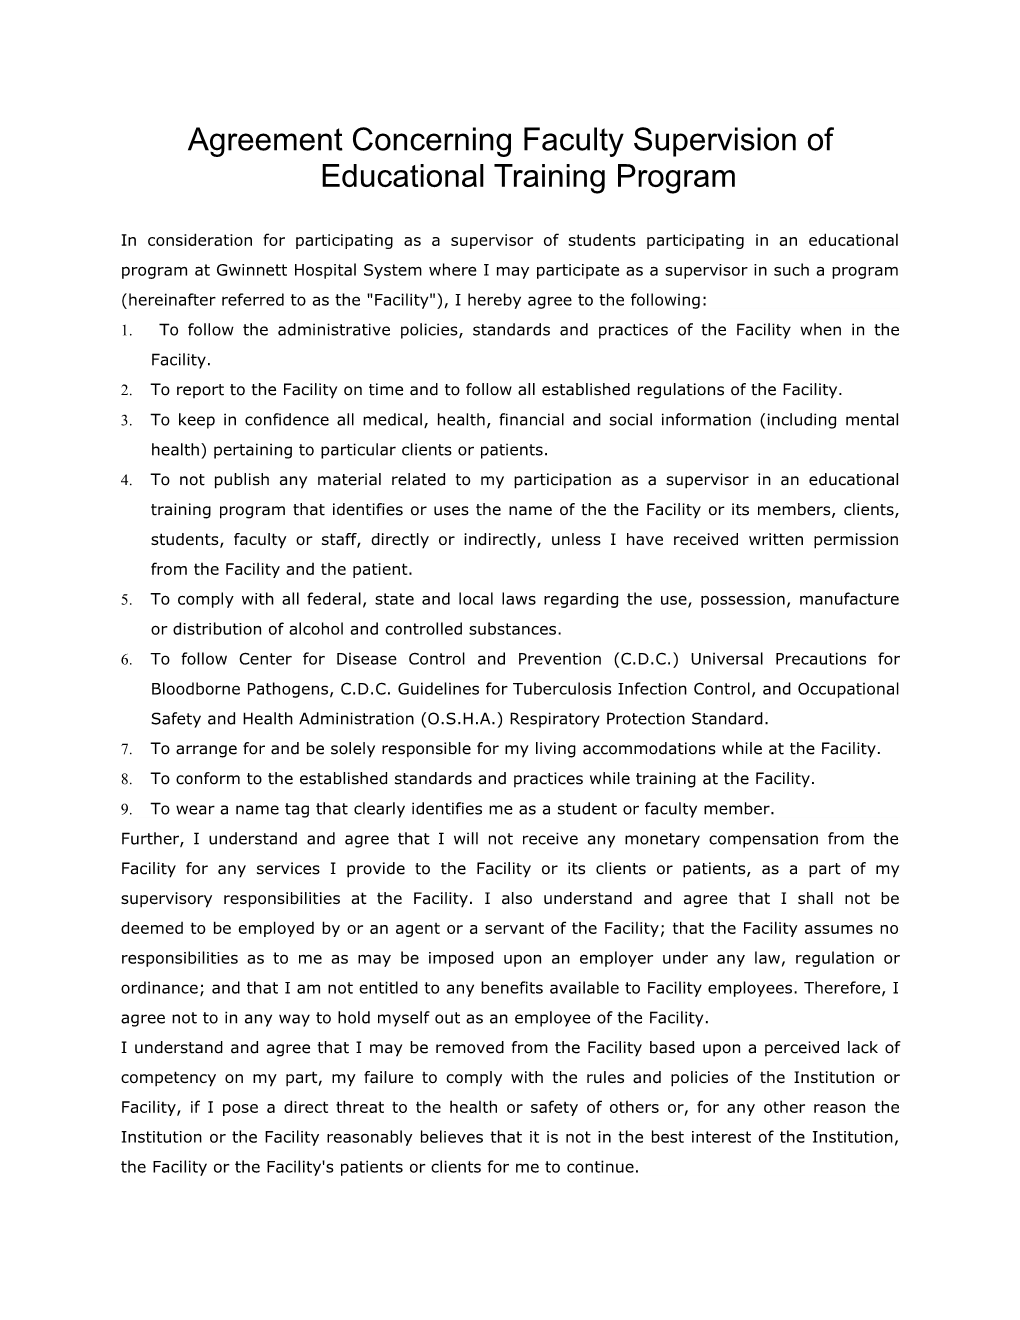 Agreement Concerning Faculty Supervision of Educational Training Program